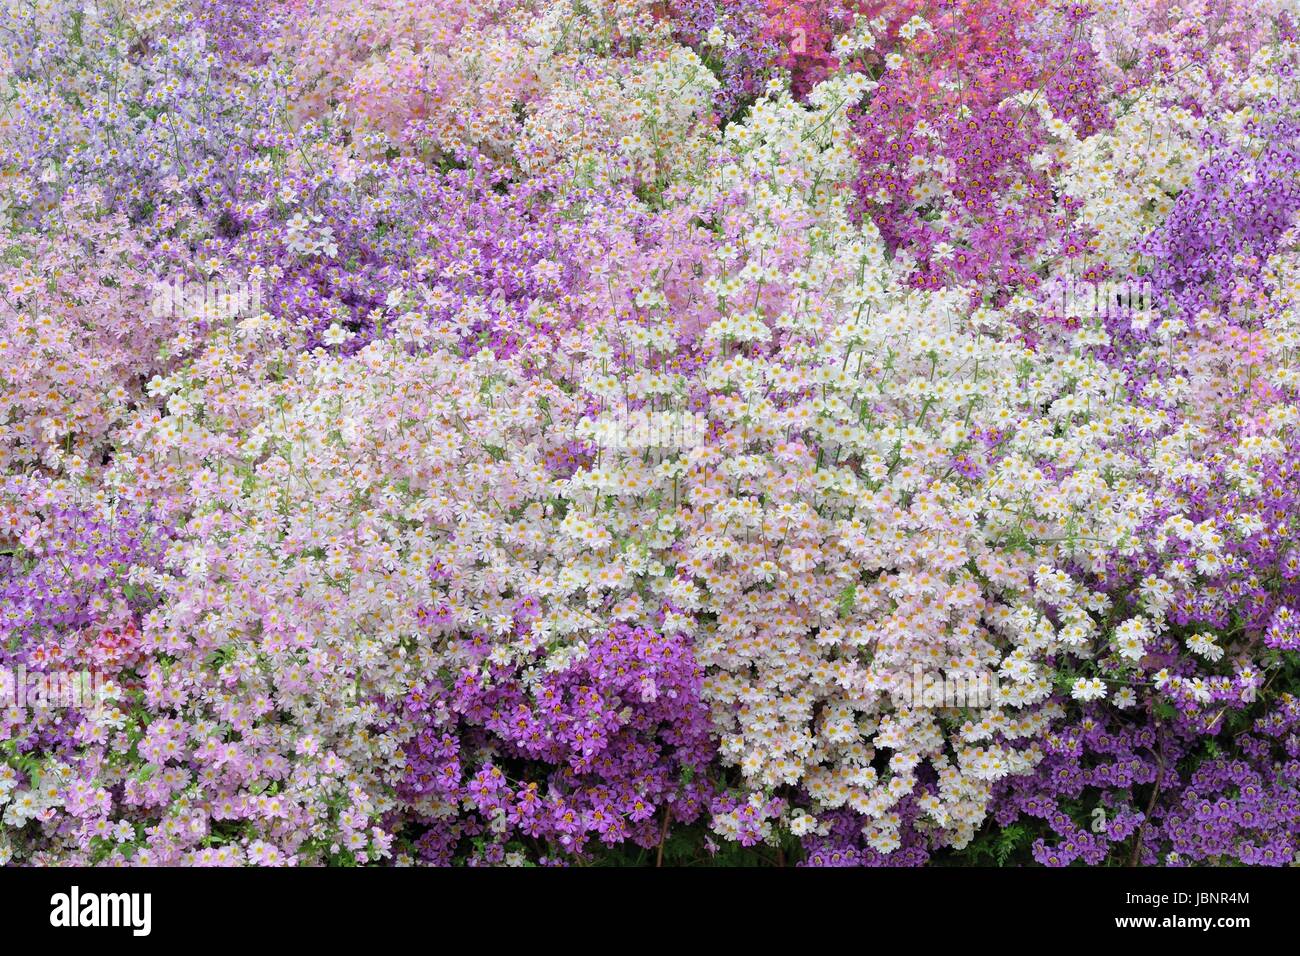 Mass of poor mans Orchids in purple and white Stock Photo